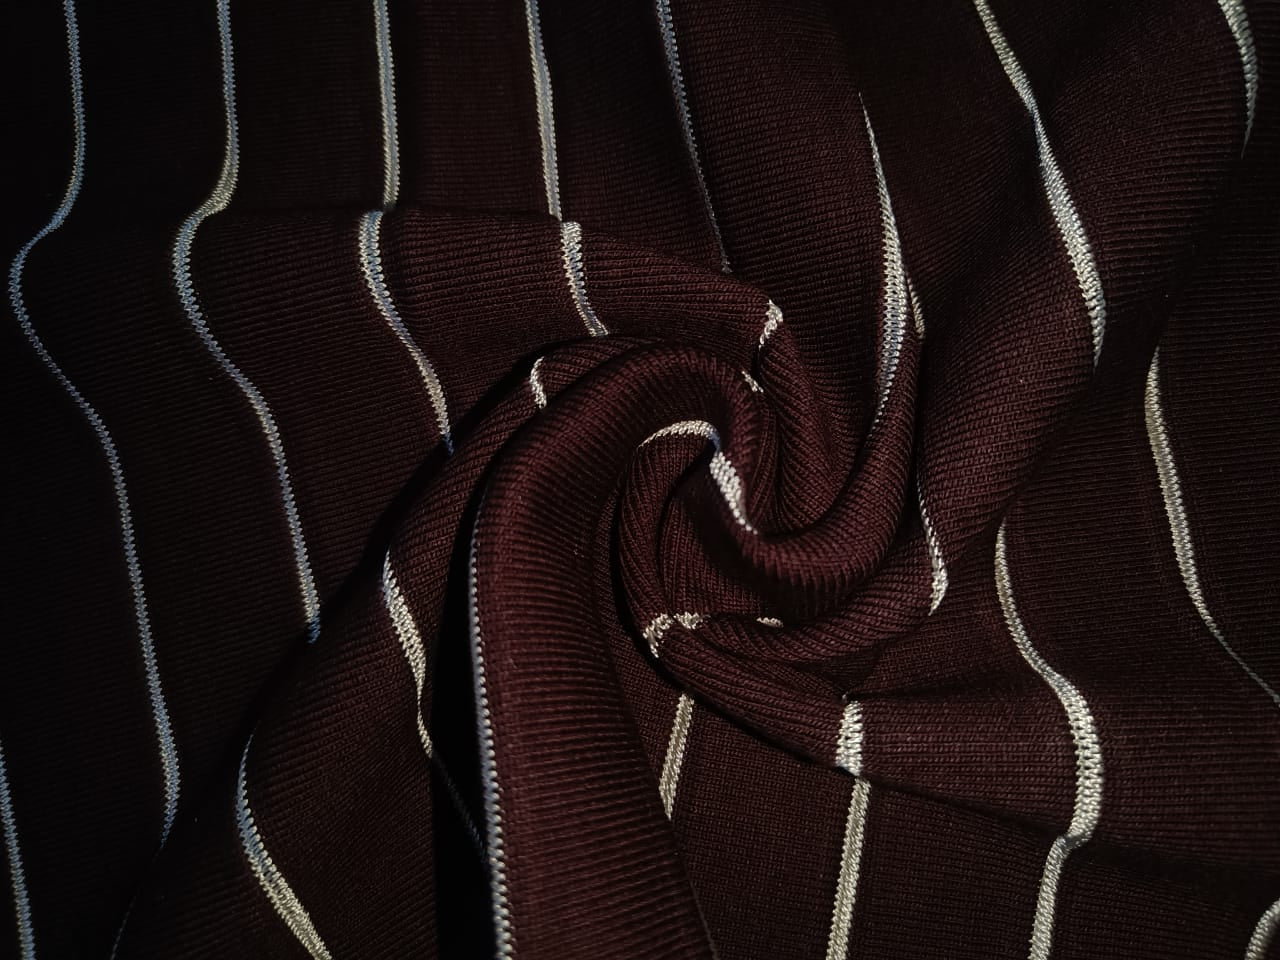 Bamboo lycra pique knit fabric 75 available in matching stripe and solid  colors brown/blue and black